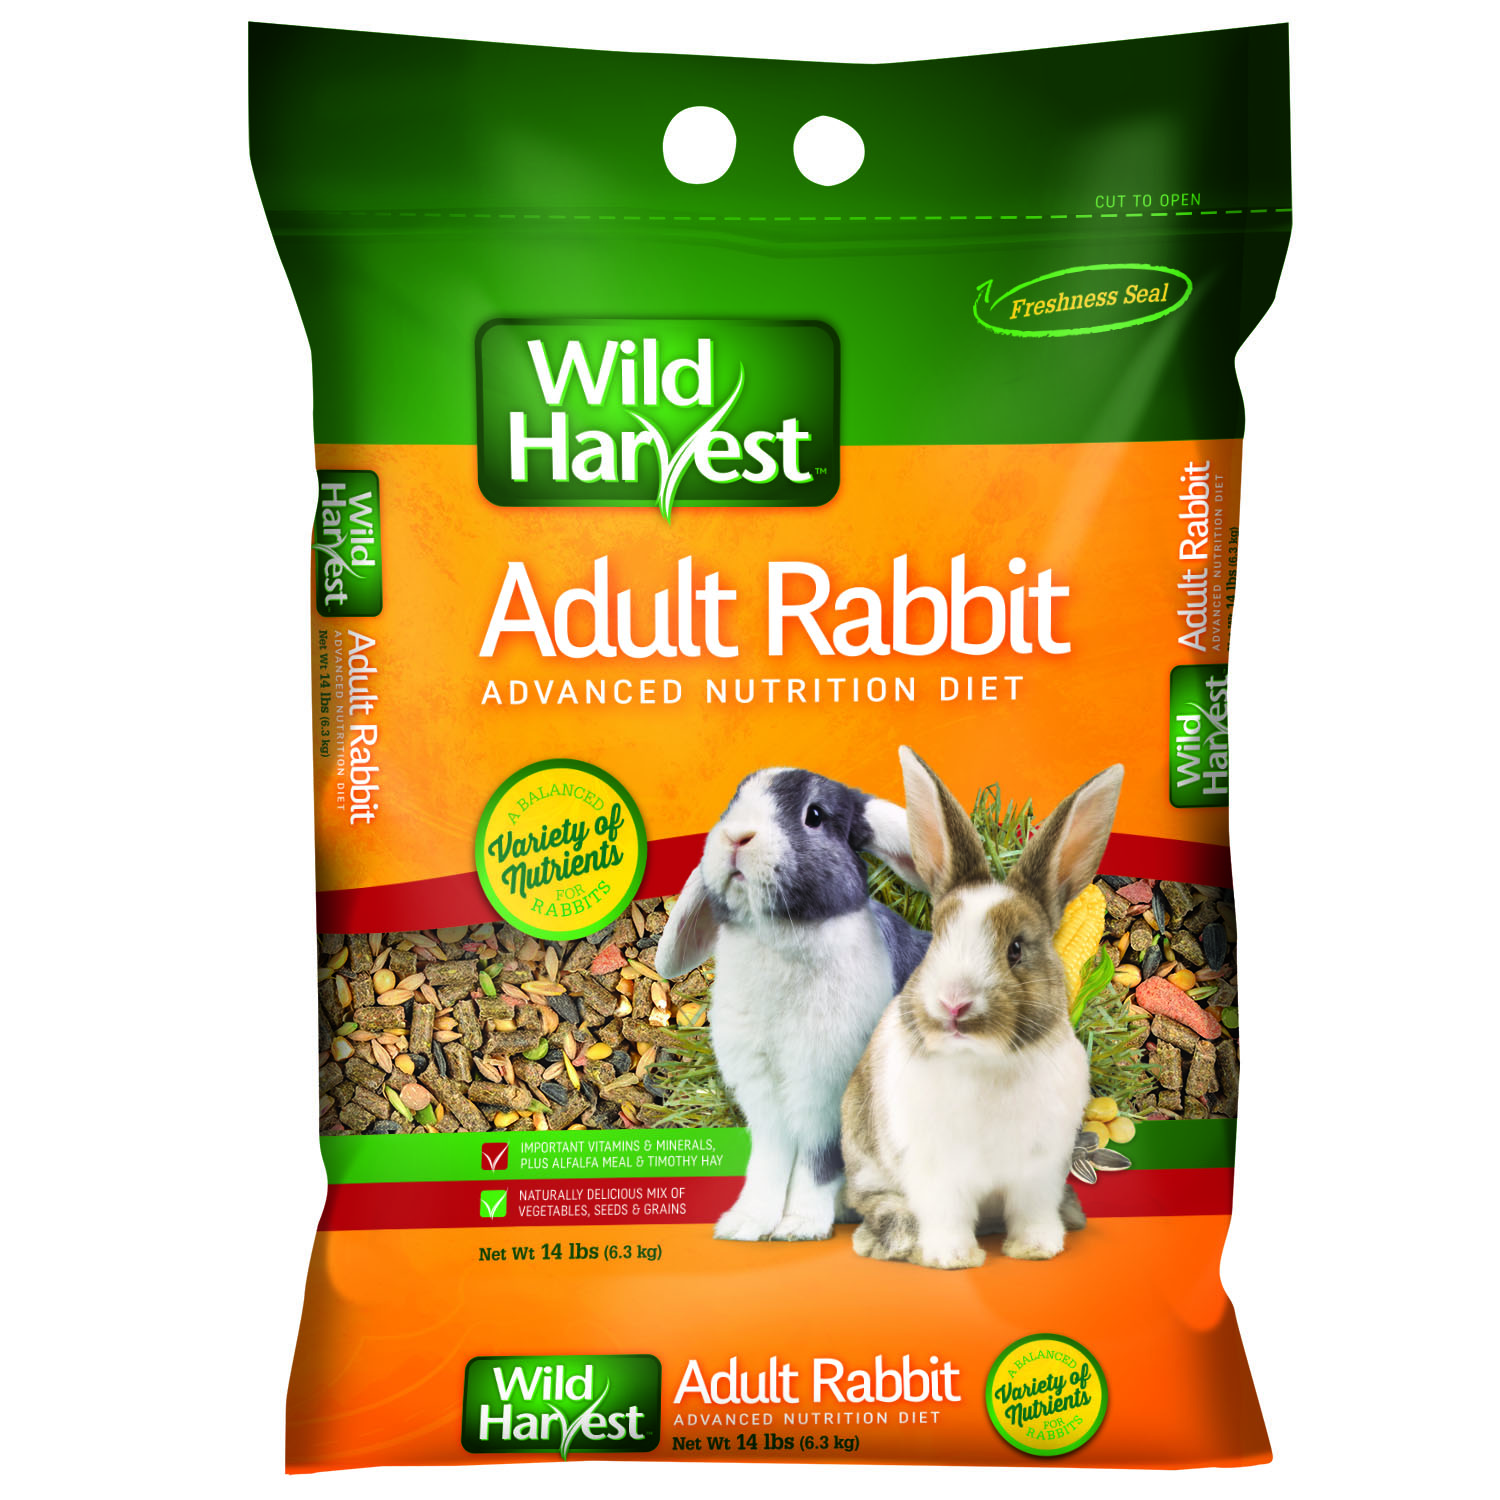 Wild Harvest Advanced Nutrition Adult Rabbit 14 Pounds, Complete and Balanced Diet - image 2 of 7